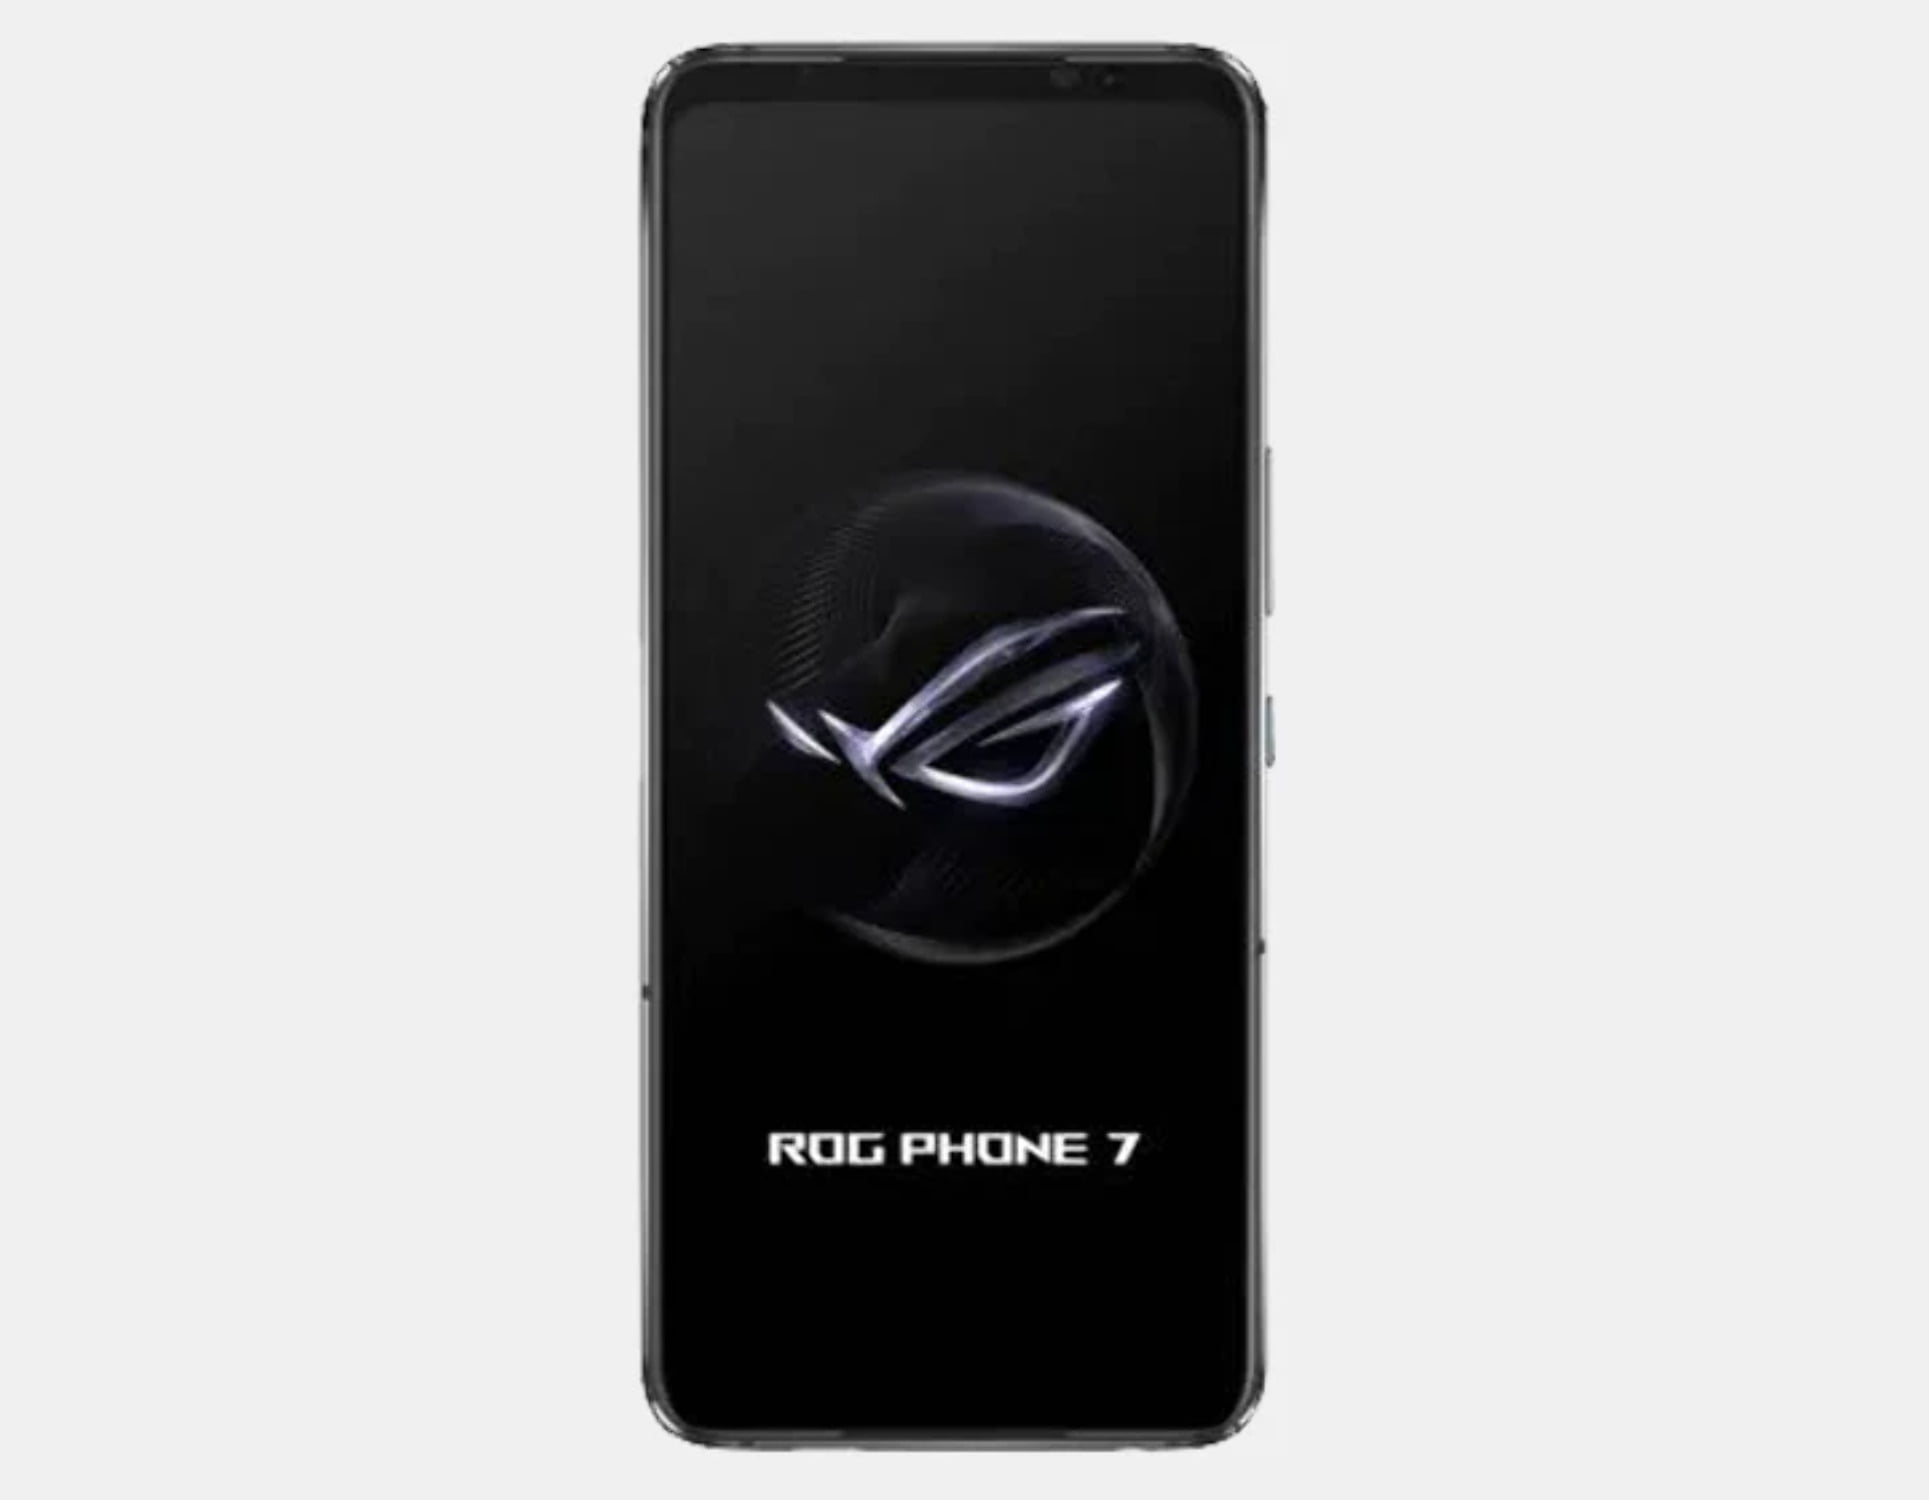 ASUS' ROG Phone 7 uses AI to automatically record your wins and losses